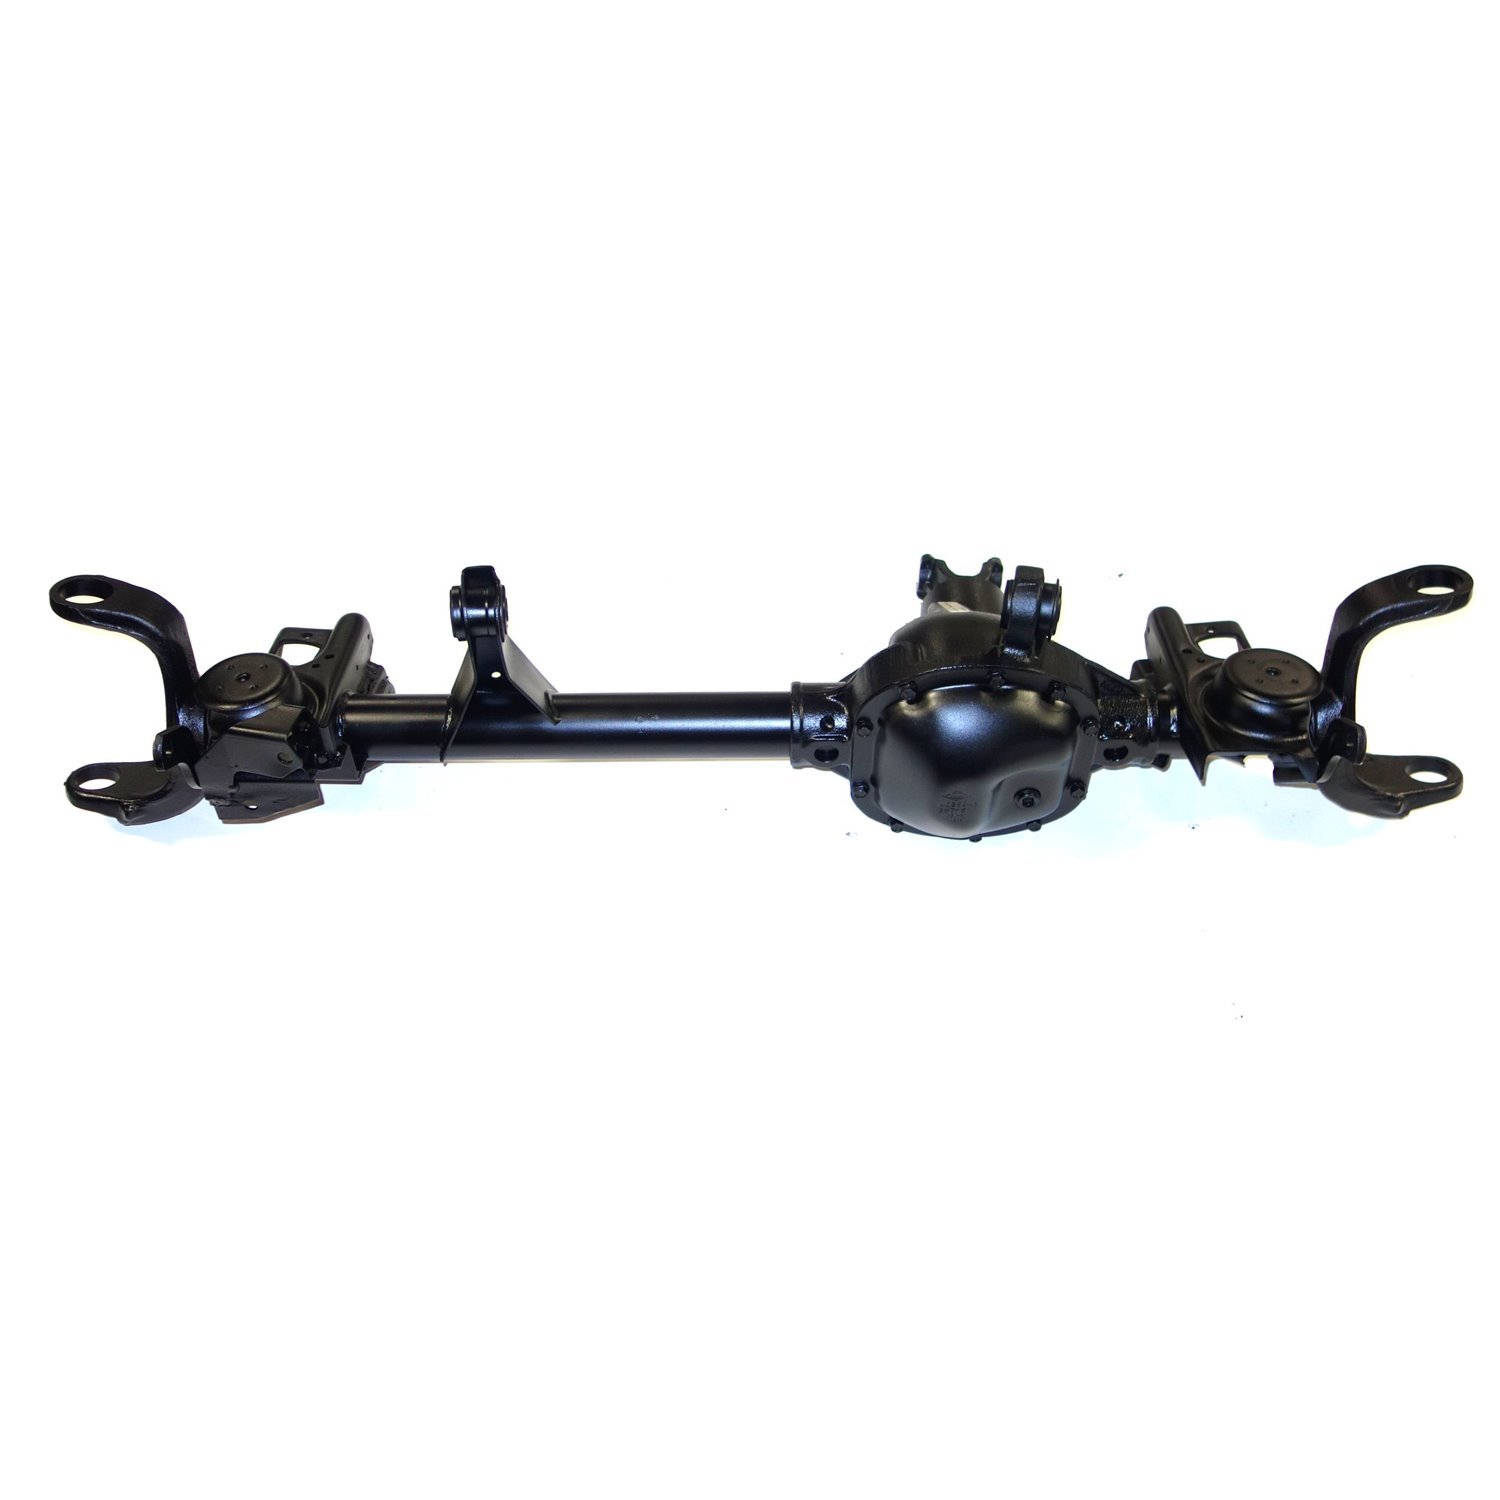 Remanufactured Complete Axle Assembly for Dana 30 97-99 Jeep Wrangler 4.11 Ratio with ABS